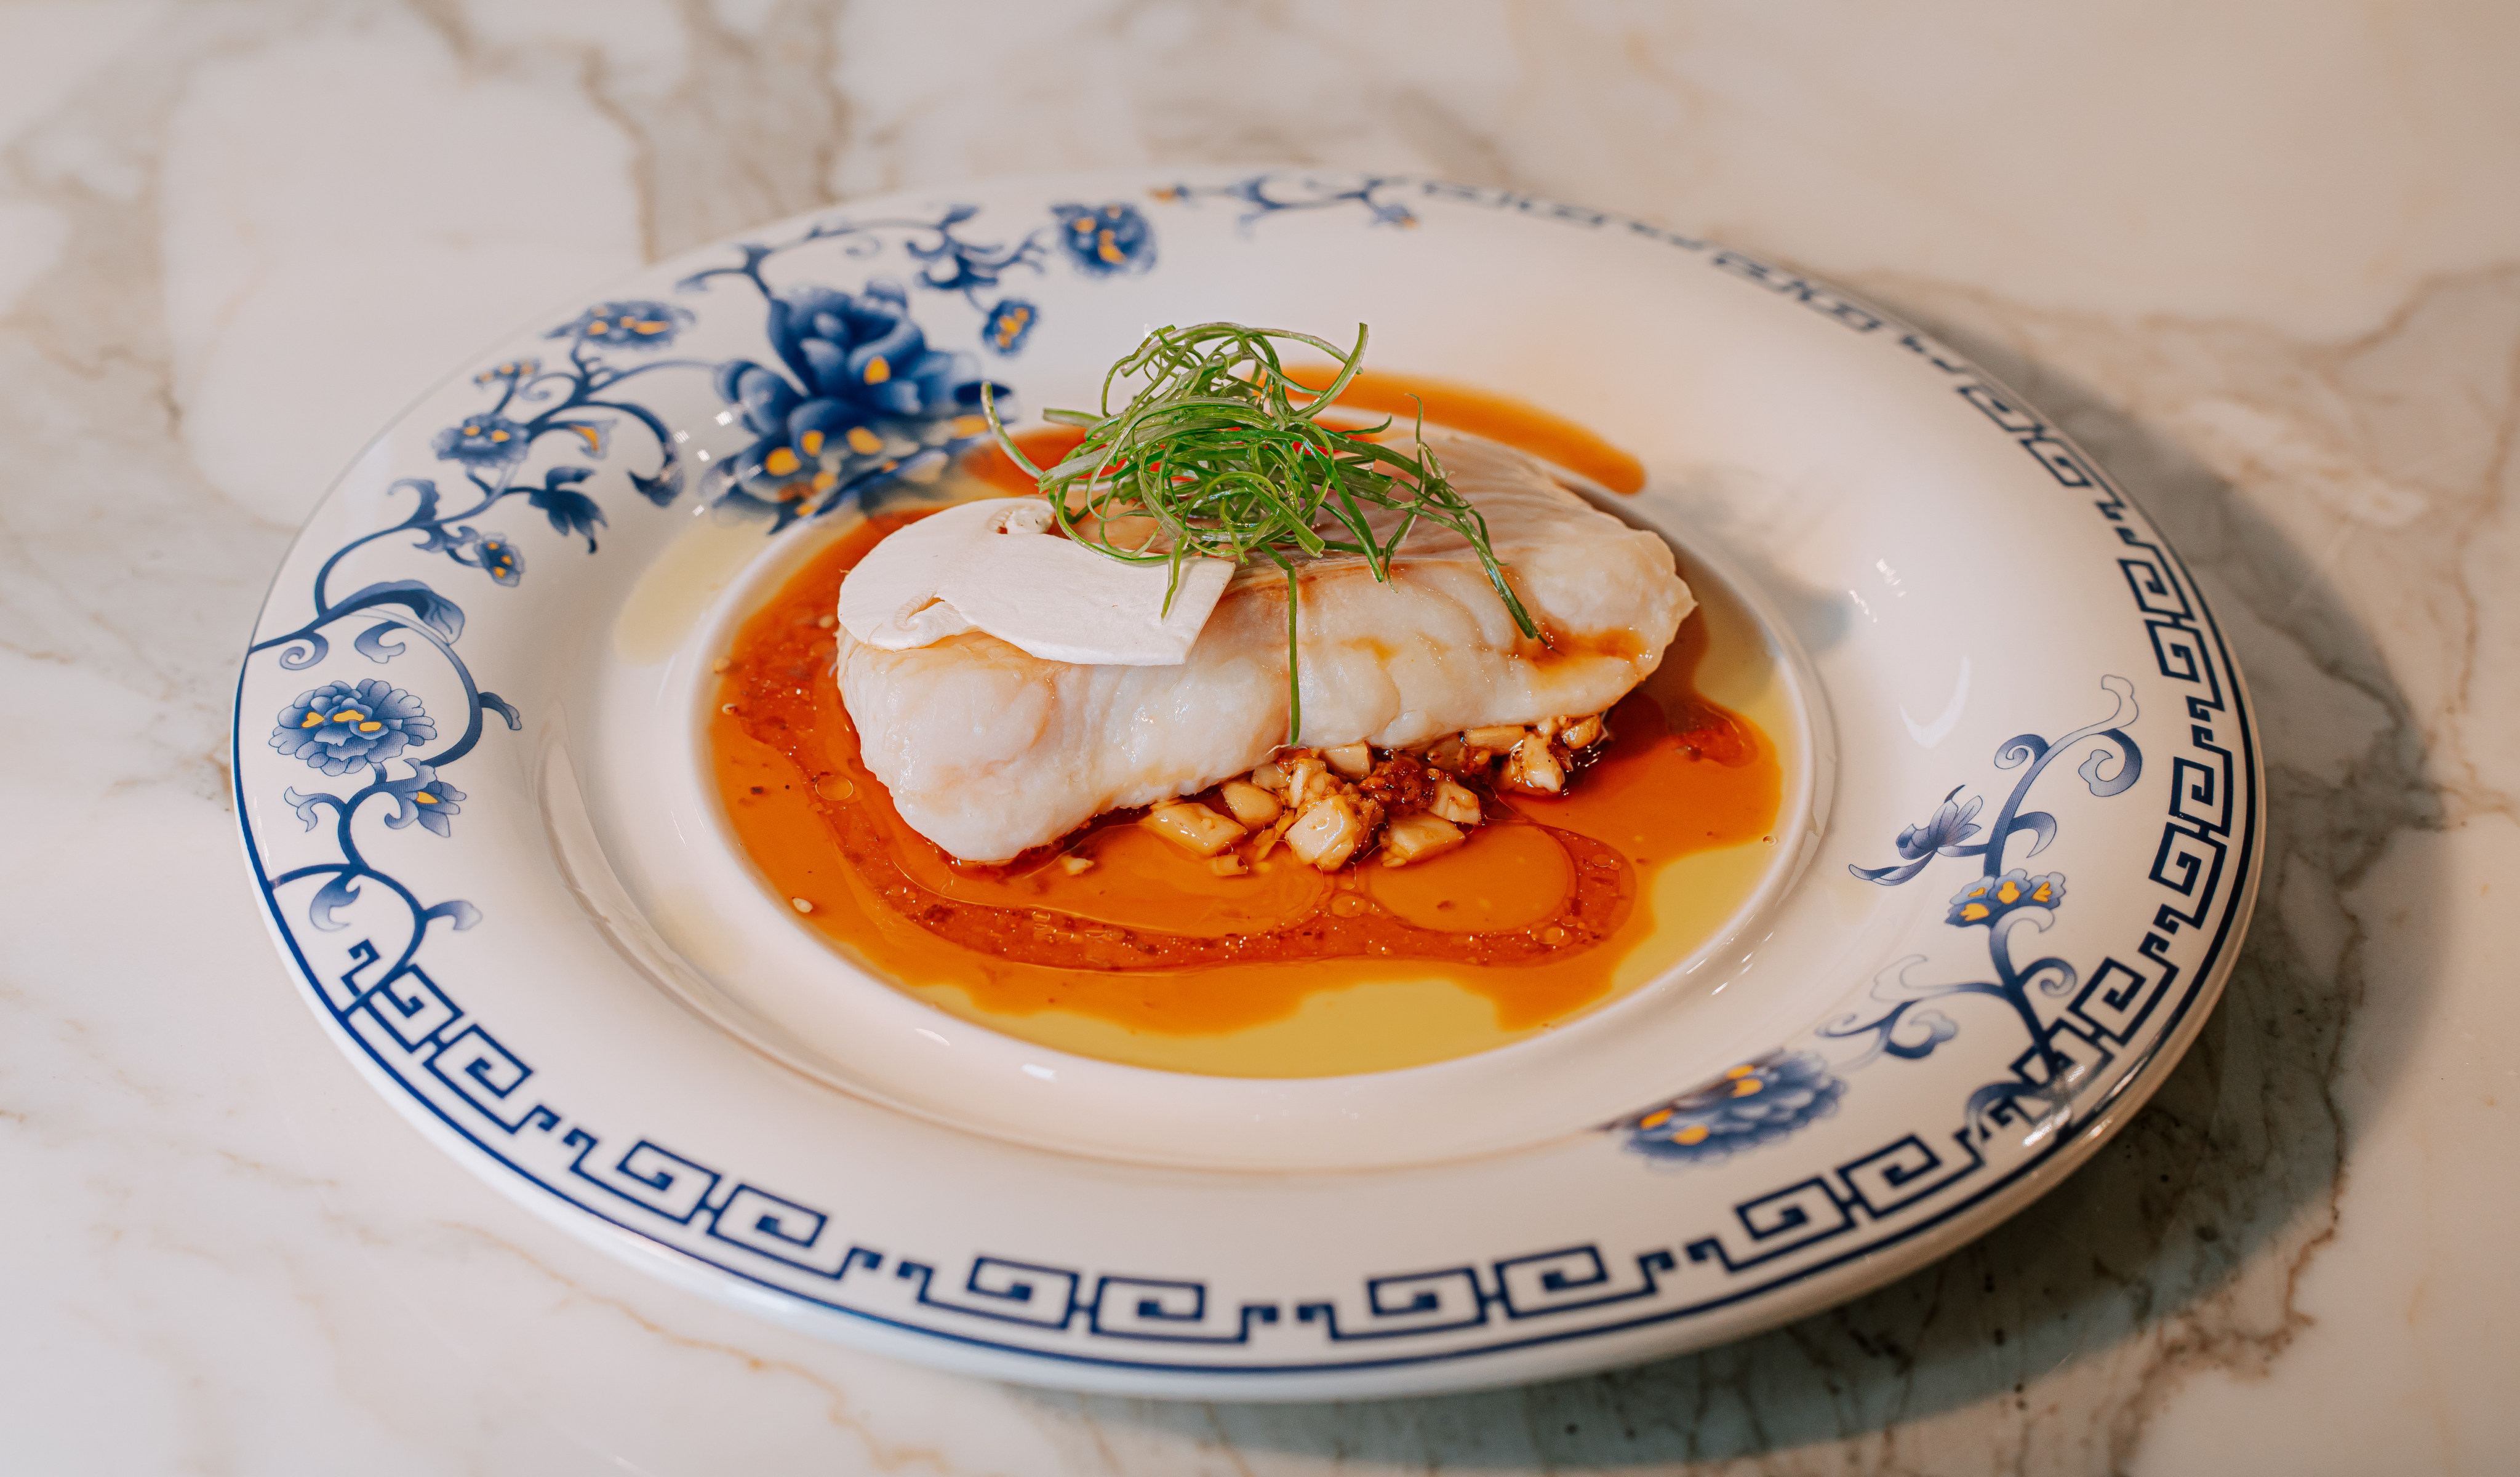 Steamed ling cod, Matsutake soy, chives and peppercorn served as part of the dinner at Beijing Mansion, a luxurious private members’ club designed in the style of a traditional Chinese siheyuan, or courtyard house, and the only one of its kind in Canada. Photo: William Luk and Joon Rho